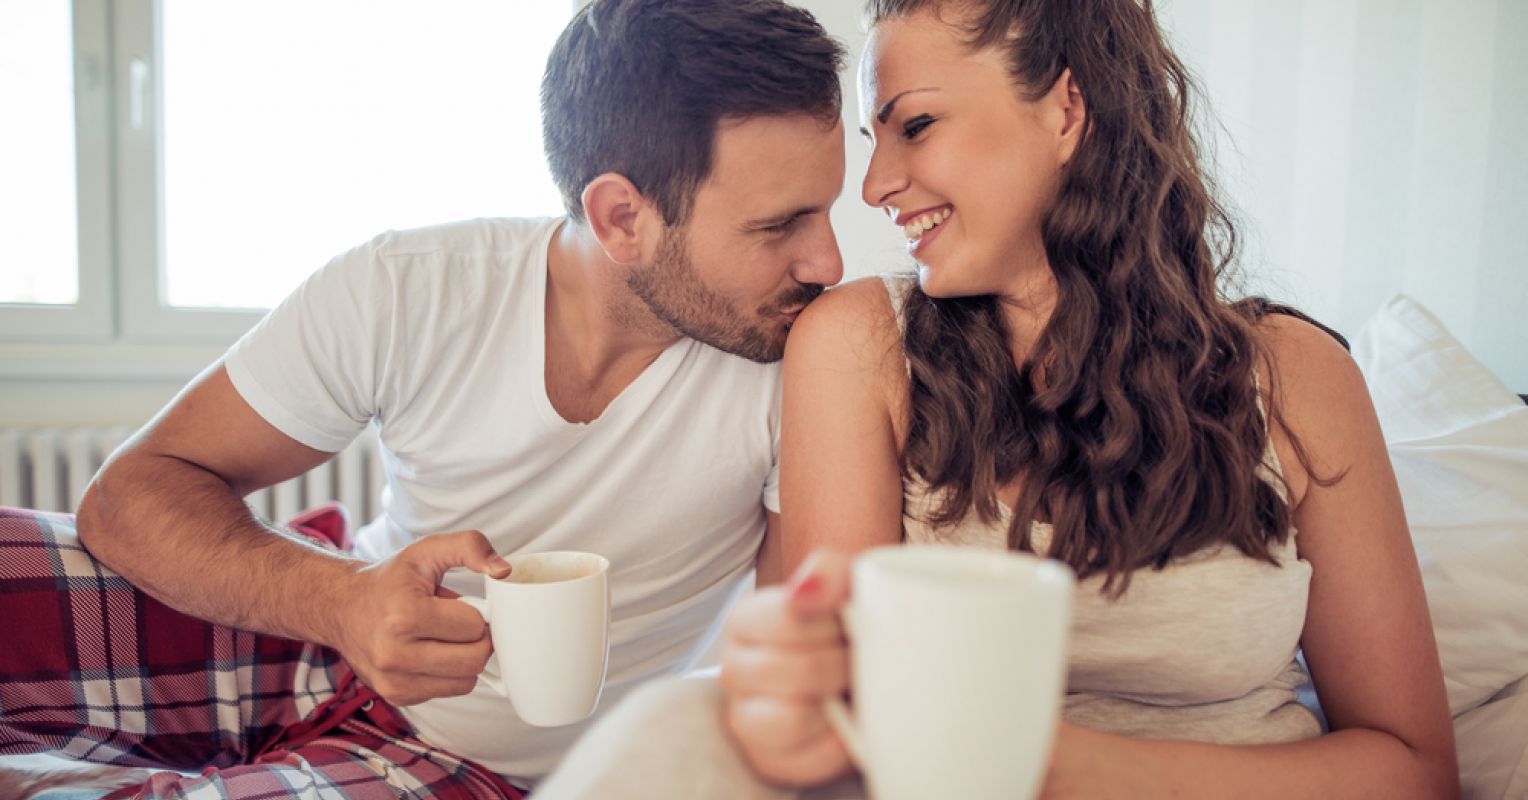 10 Things Your Relationship Needs to Thrive